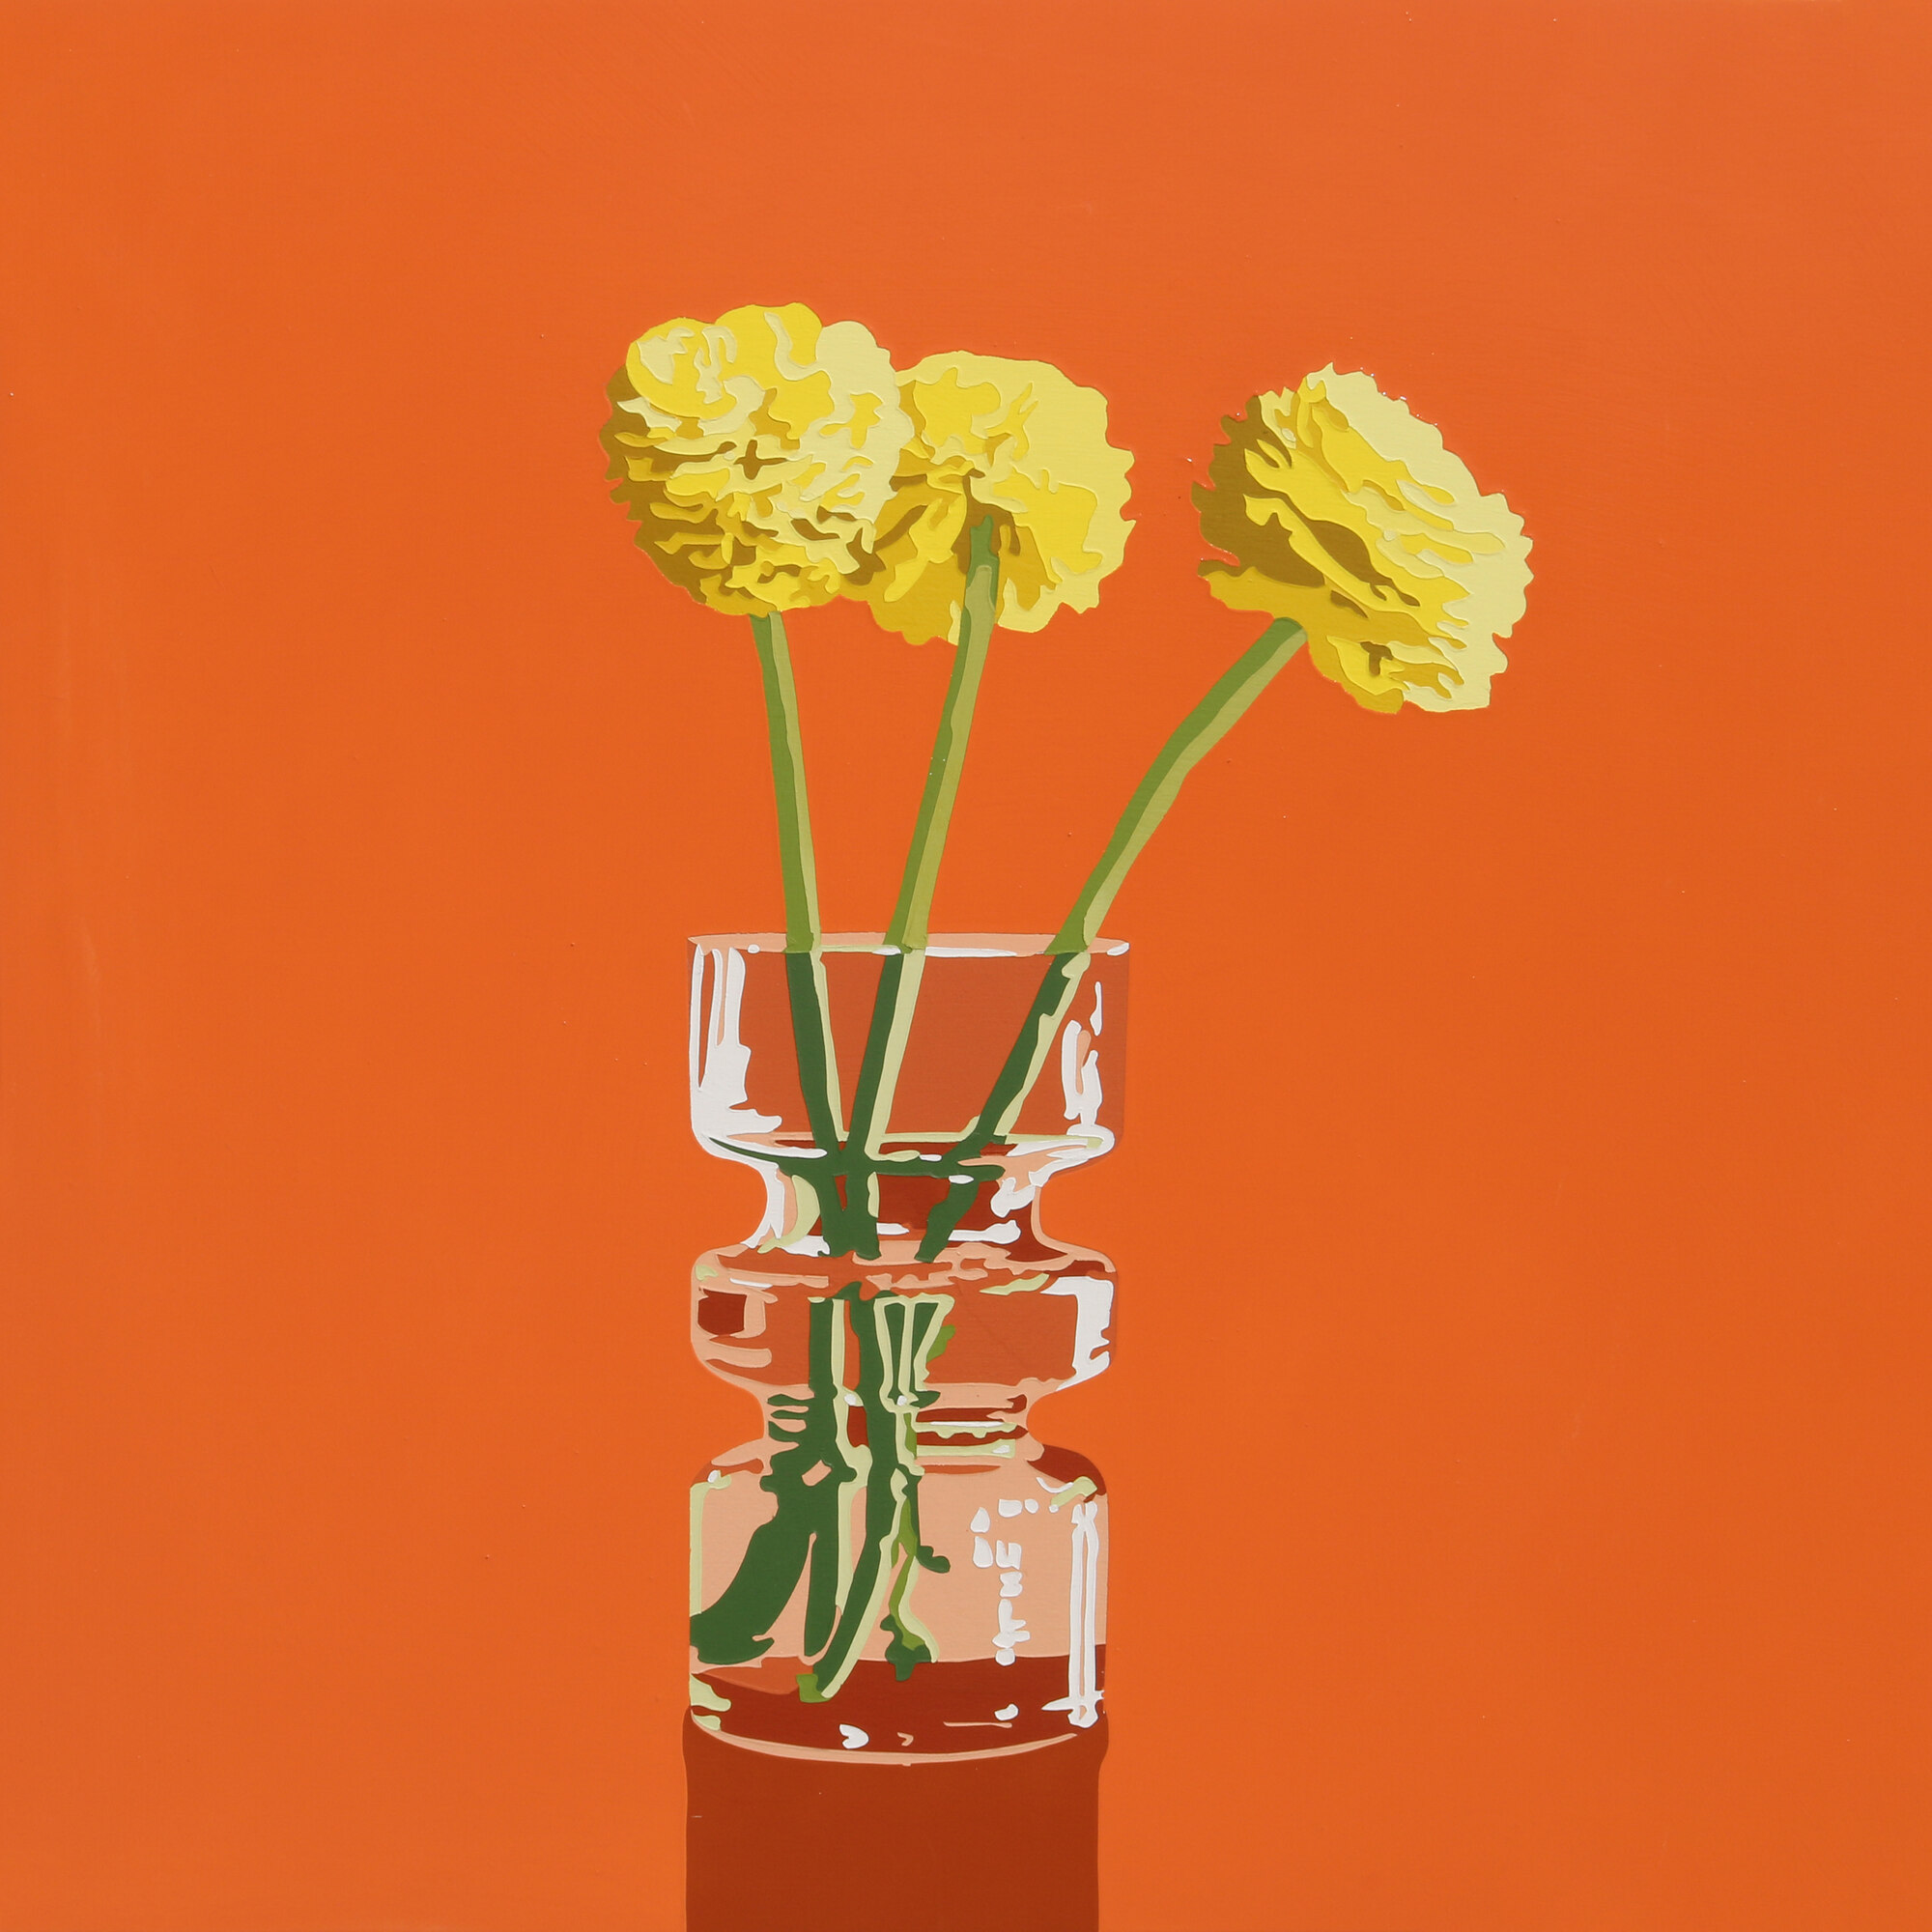 A Lori Larusso painting of yellow flowers on an orange background